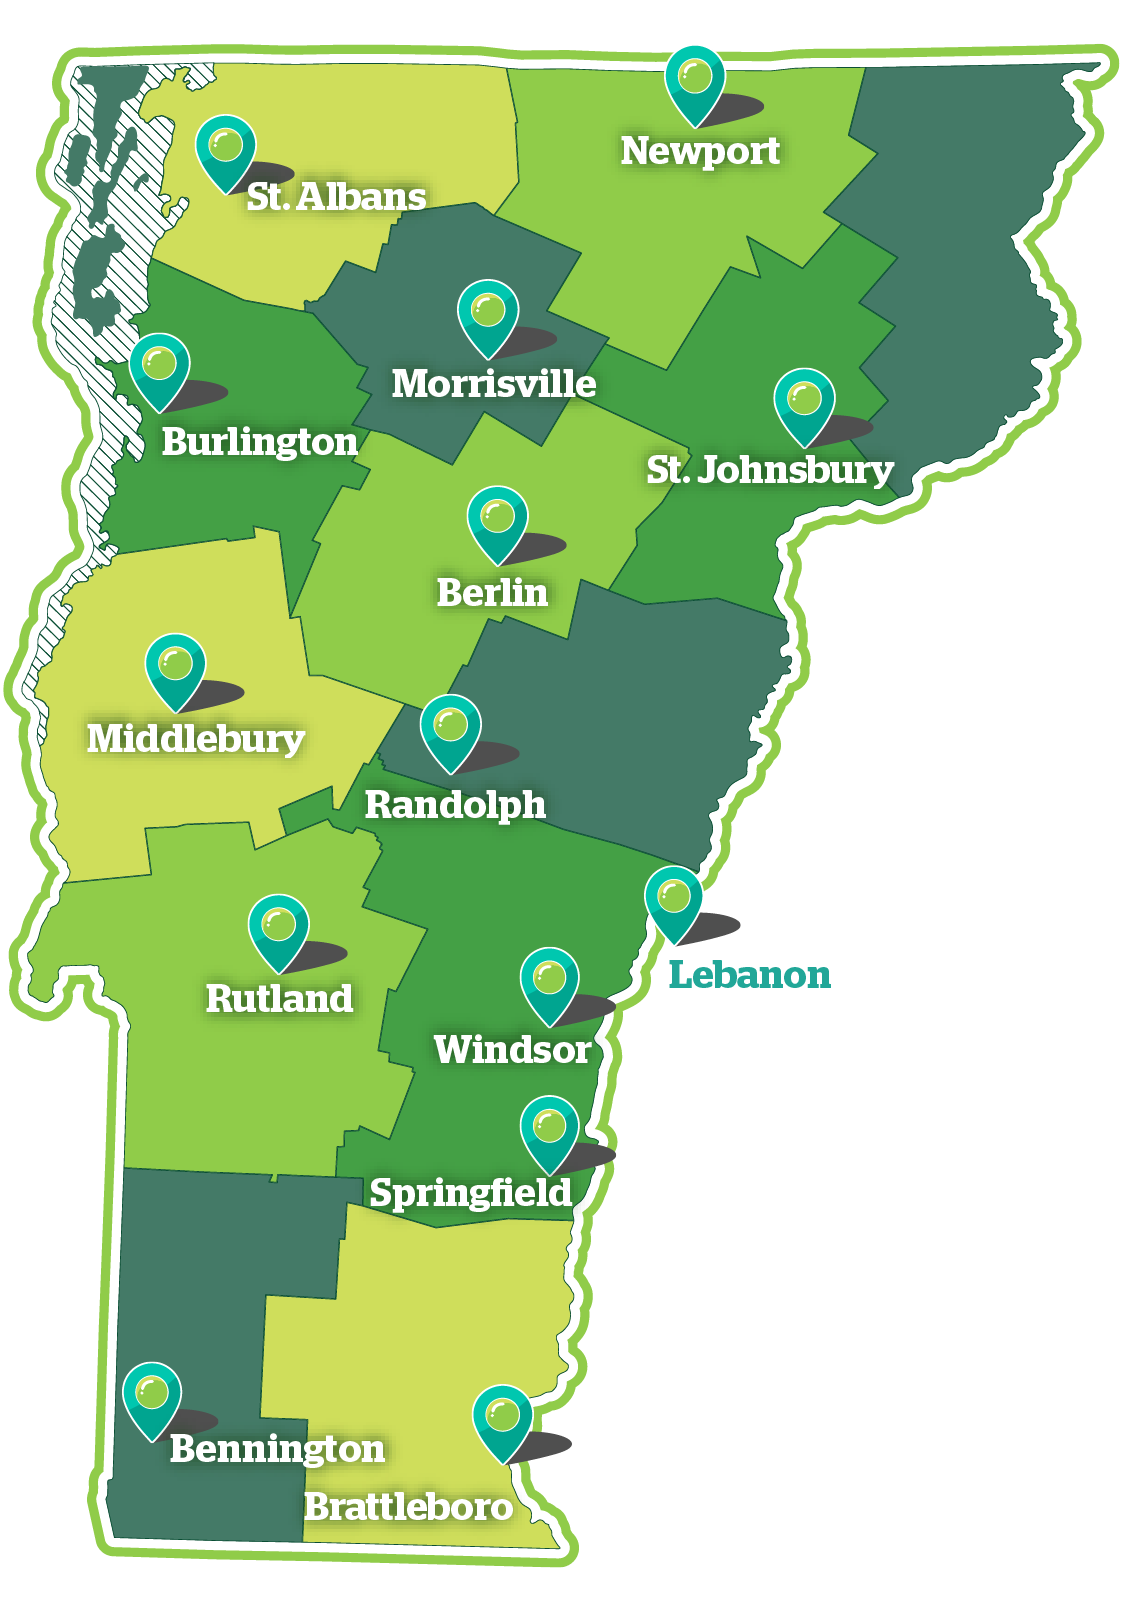 A map of Vermont that shows the boundaries of the health service areas in the state, and the locations - marked with pins - of the hospitals that participate in OneCare. These HSAs include, starting from the northern part of Vermont going south: St. Albans, Newport, Burlington, Morrisville, St. Johnsbury, Berlin, Middlebury, Randolph, Rutland, Windsor, Lebanon, Springfield, Bennington, and Brattleboro. 